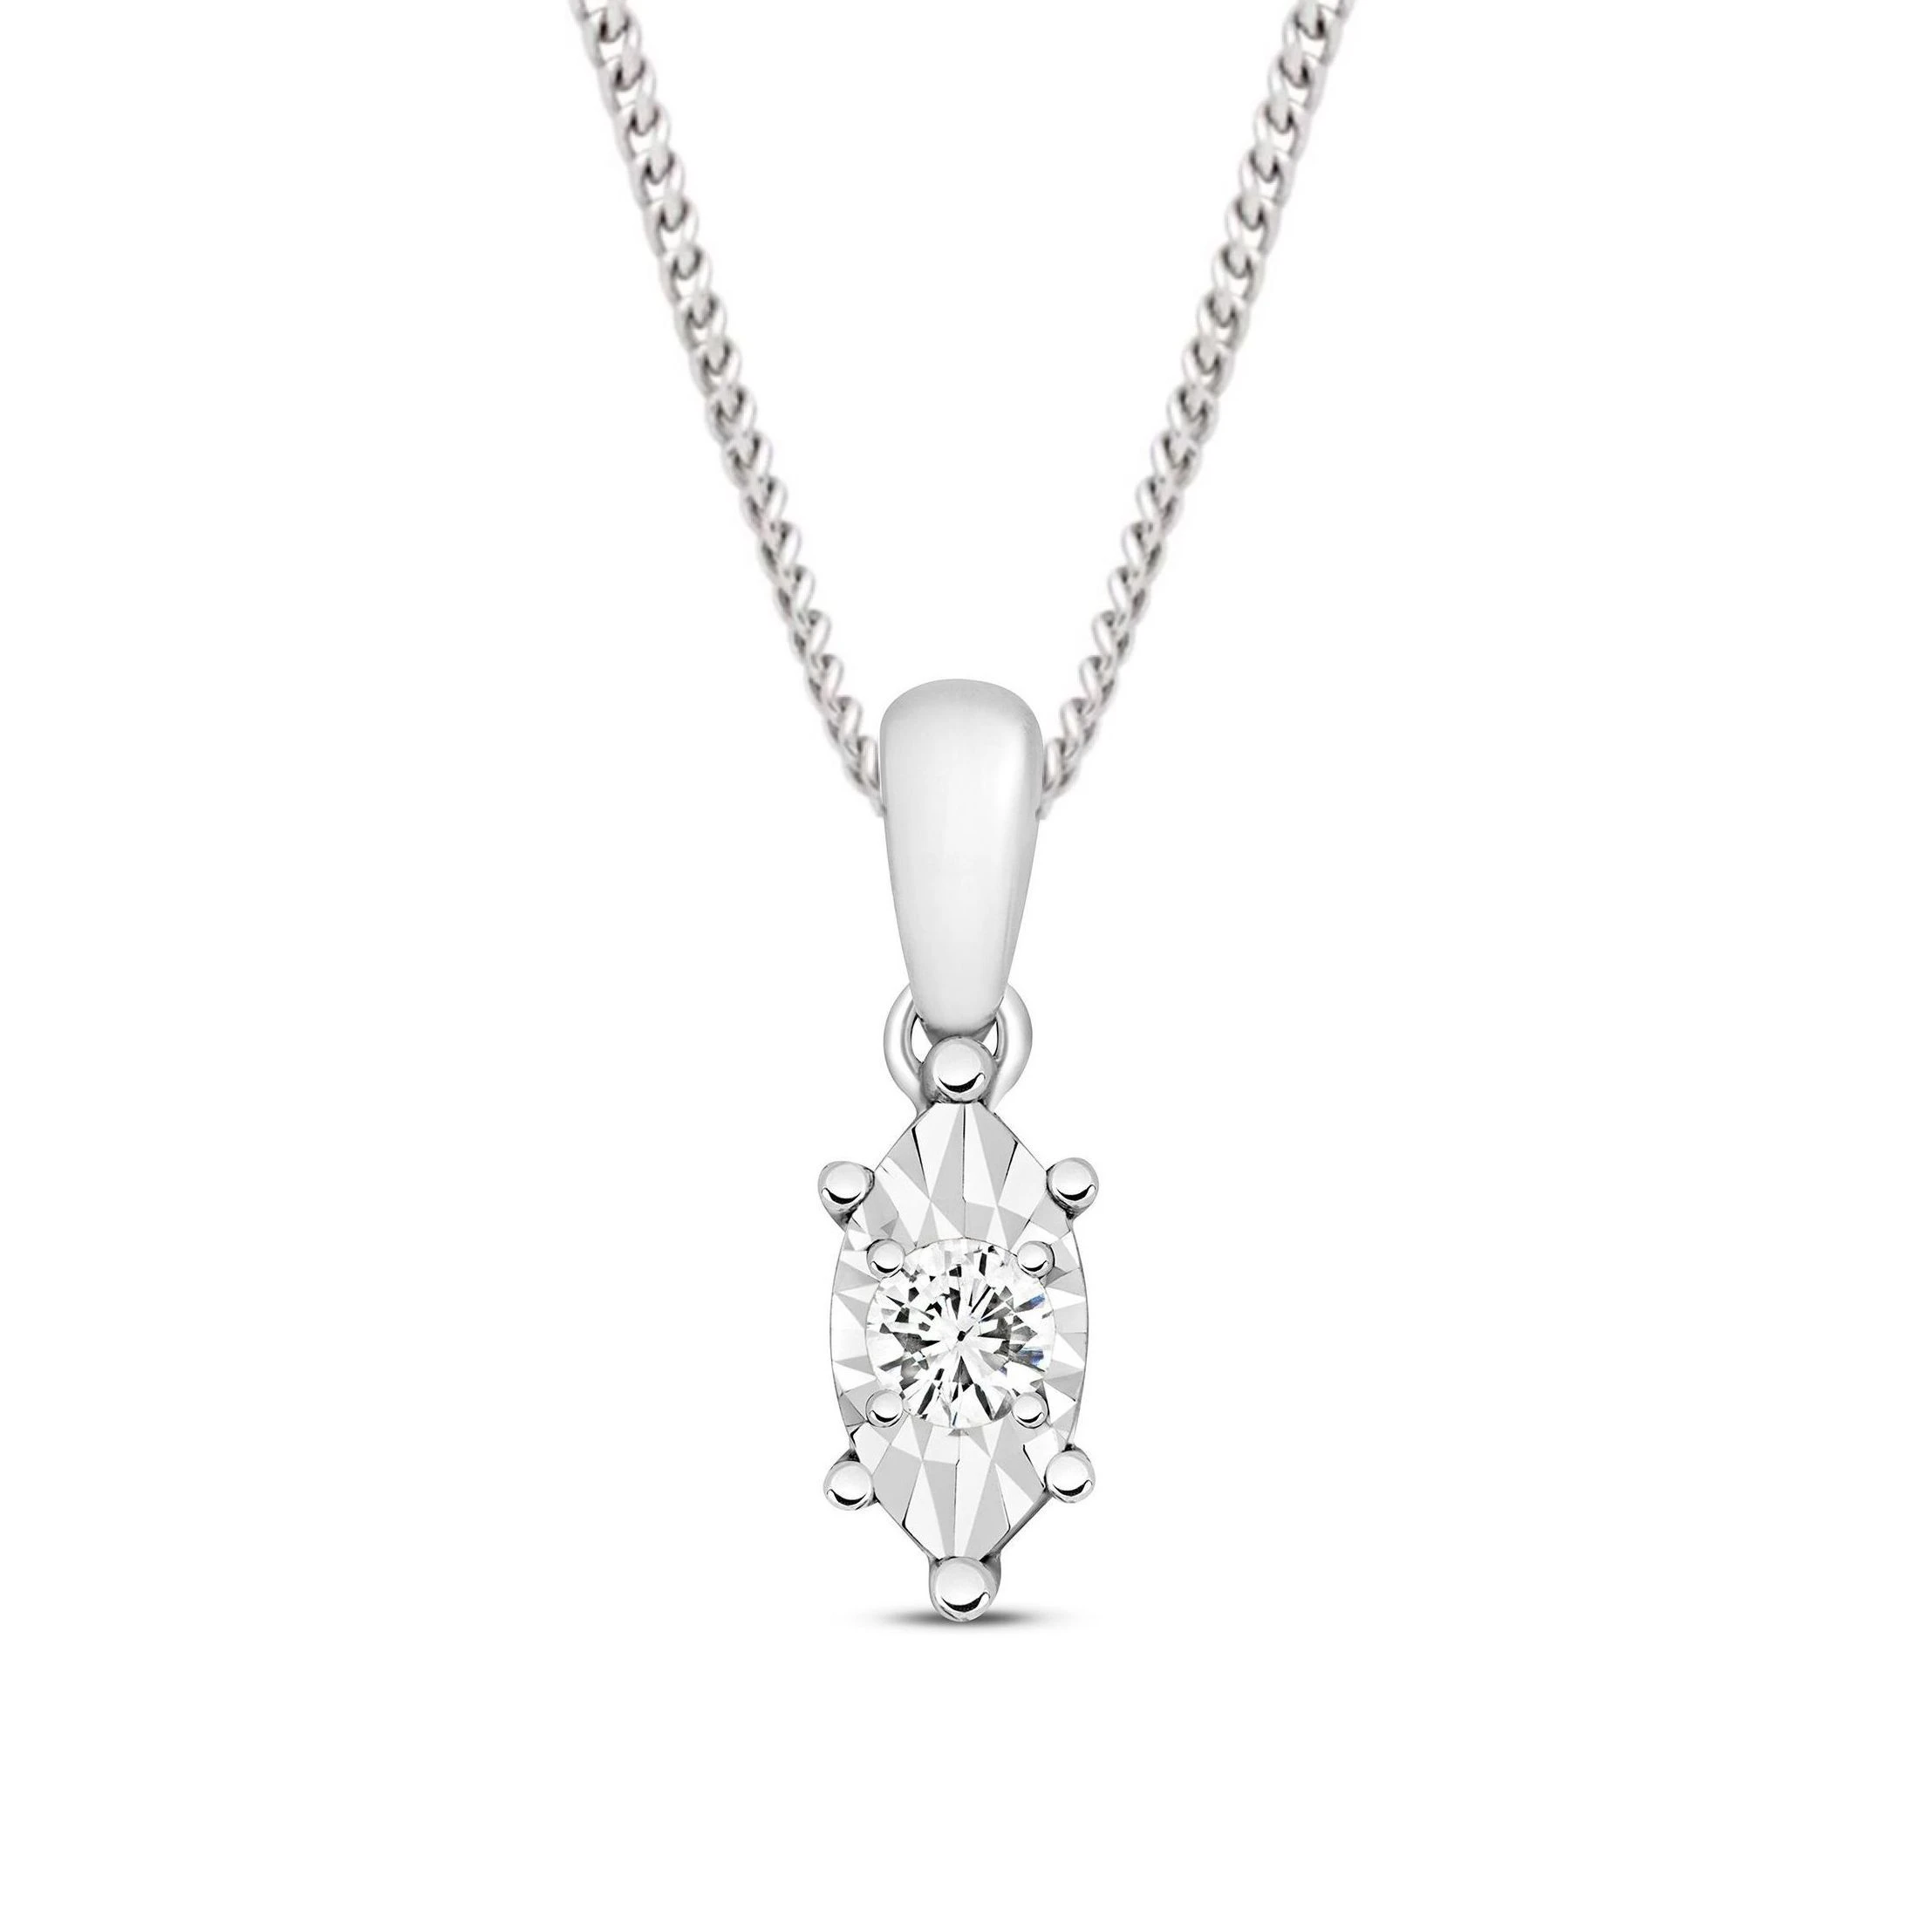 1/2 Look A Like Illusion Set Marquise Shape Solitaire Diamond Pendant Necklace